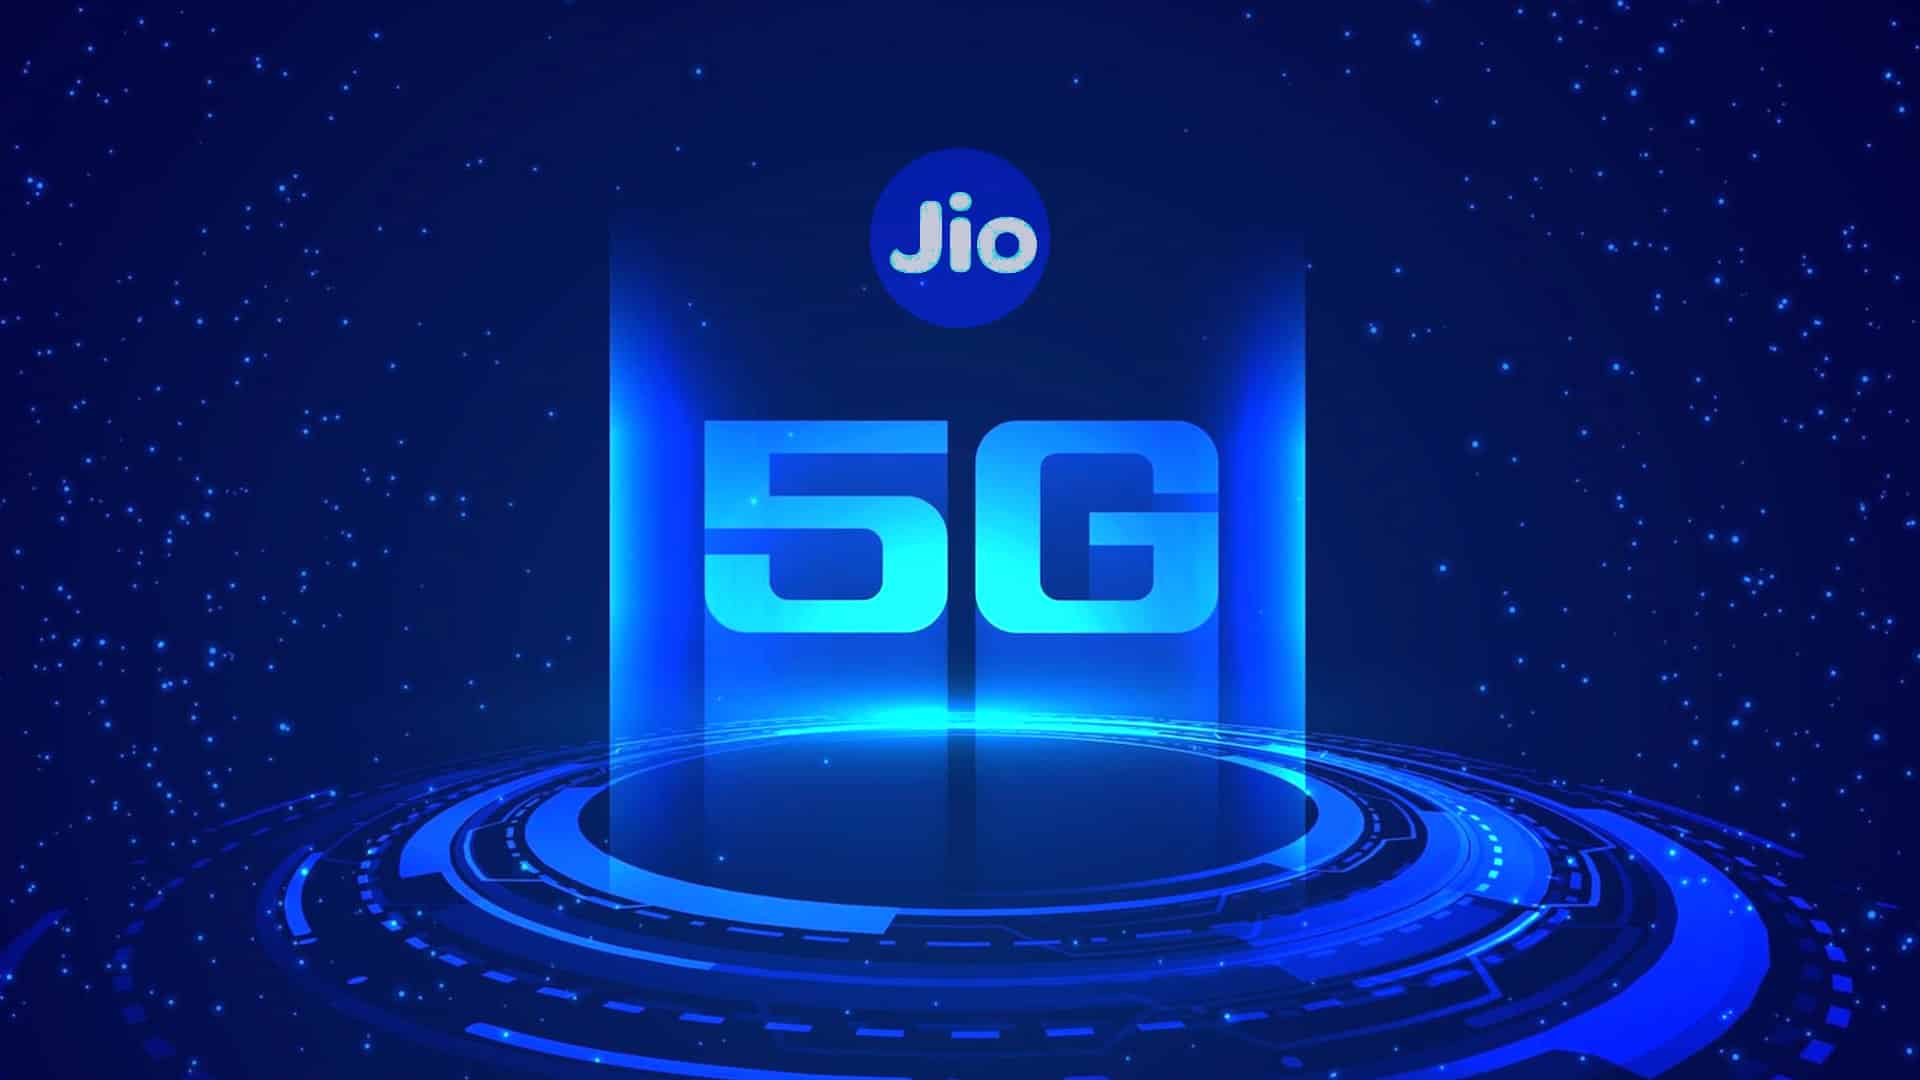 io to start beta trial of 5G services in 4 cities from Oct 5